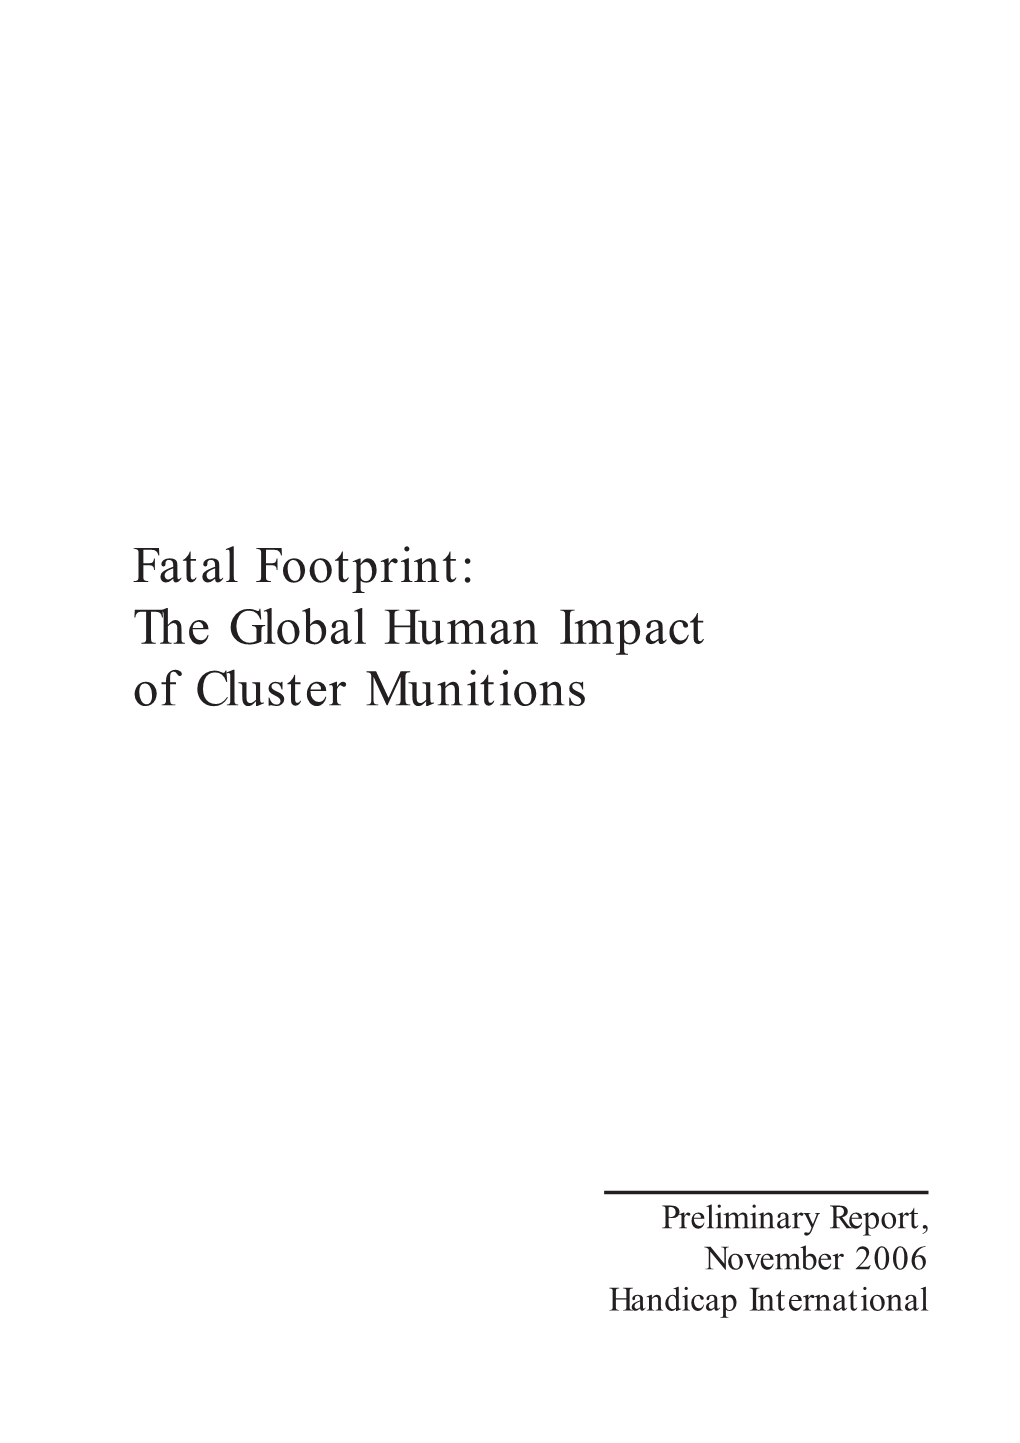 Fatal Footprint: the Global Human Impact of Cluster Munitions